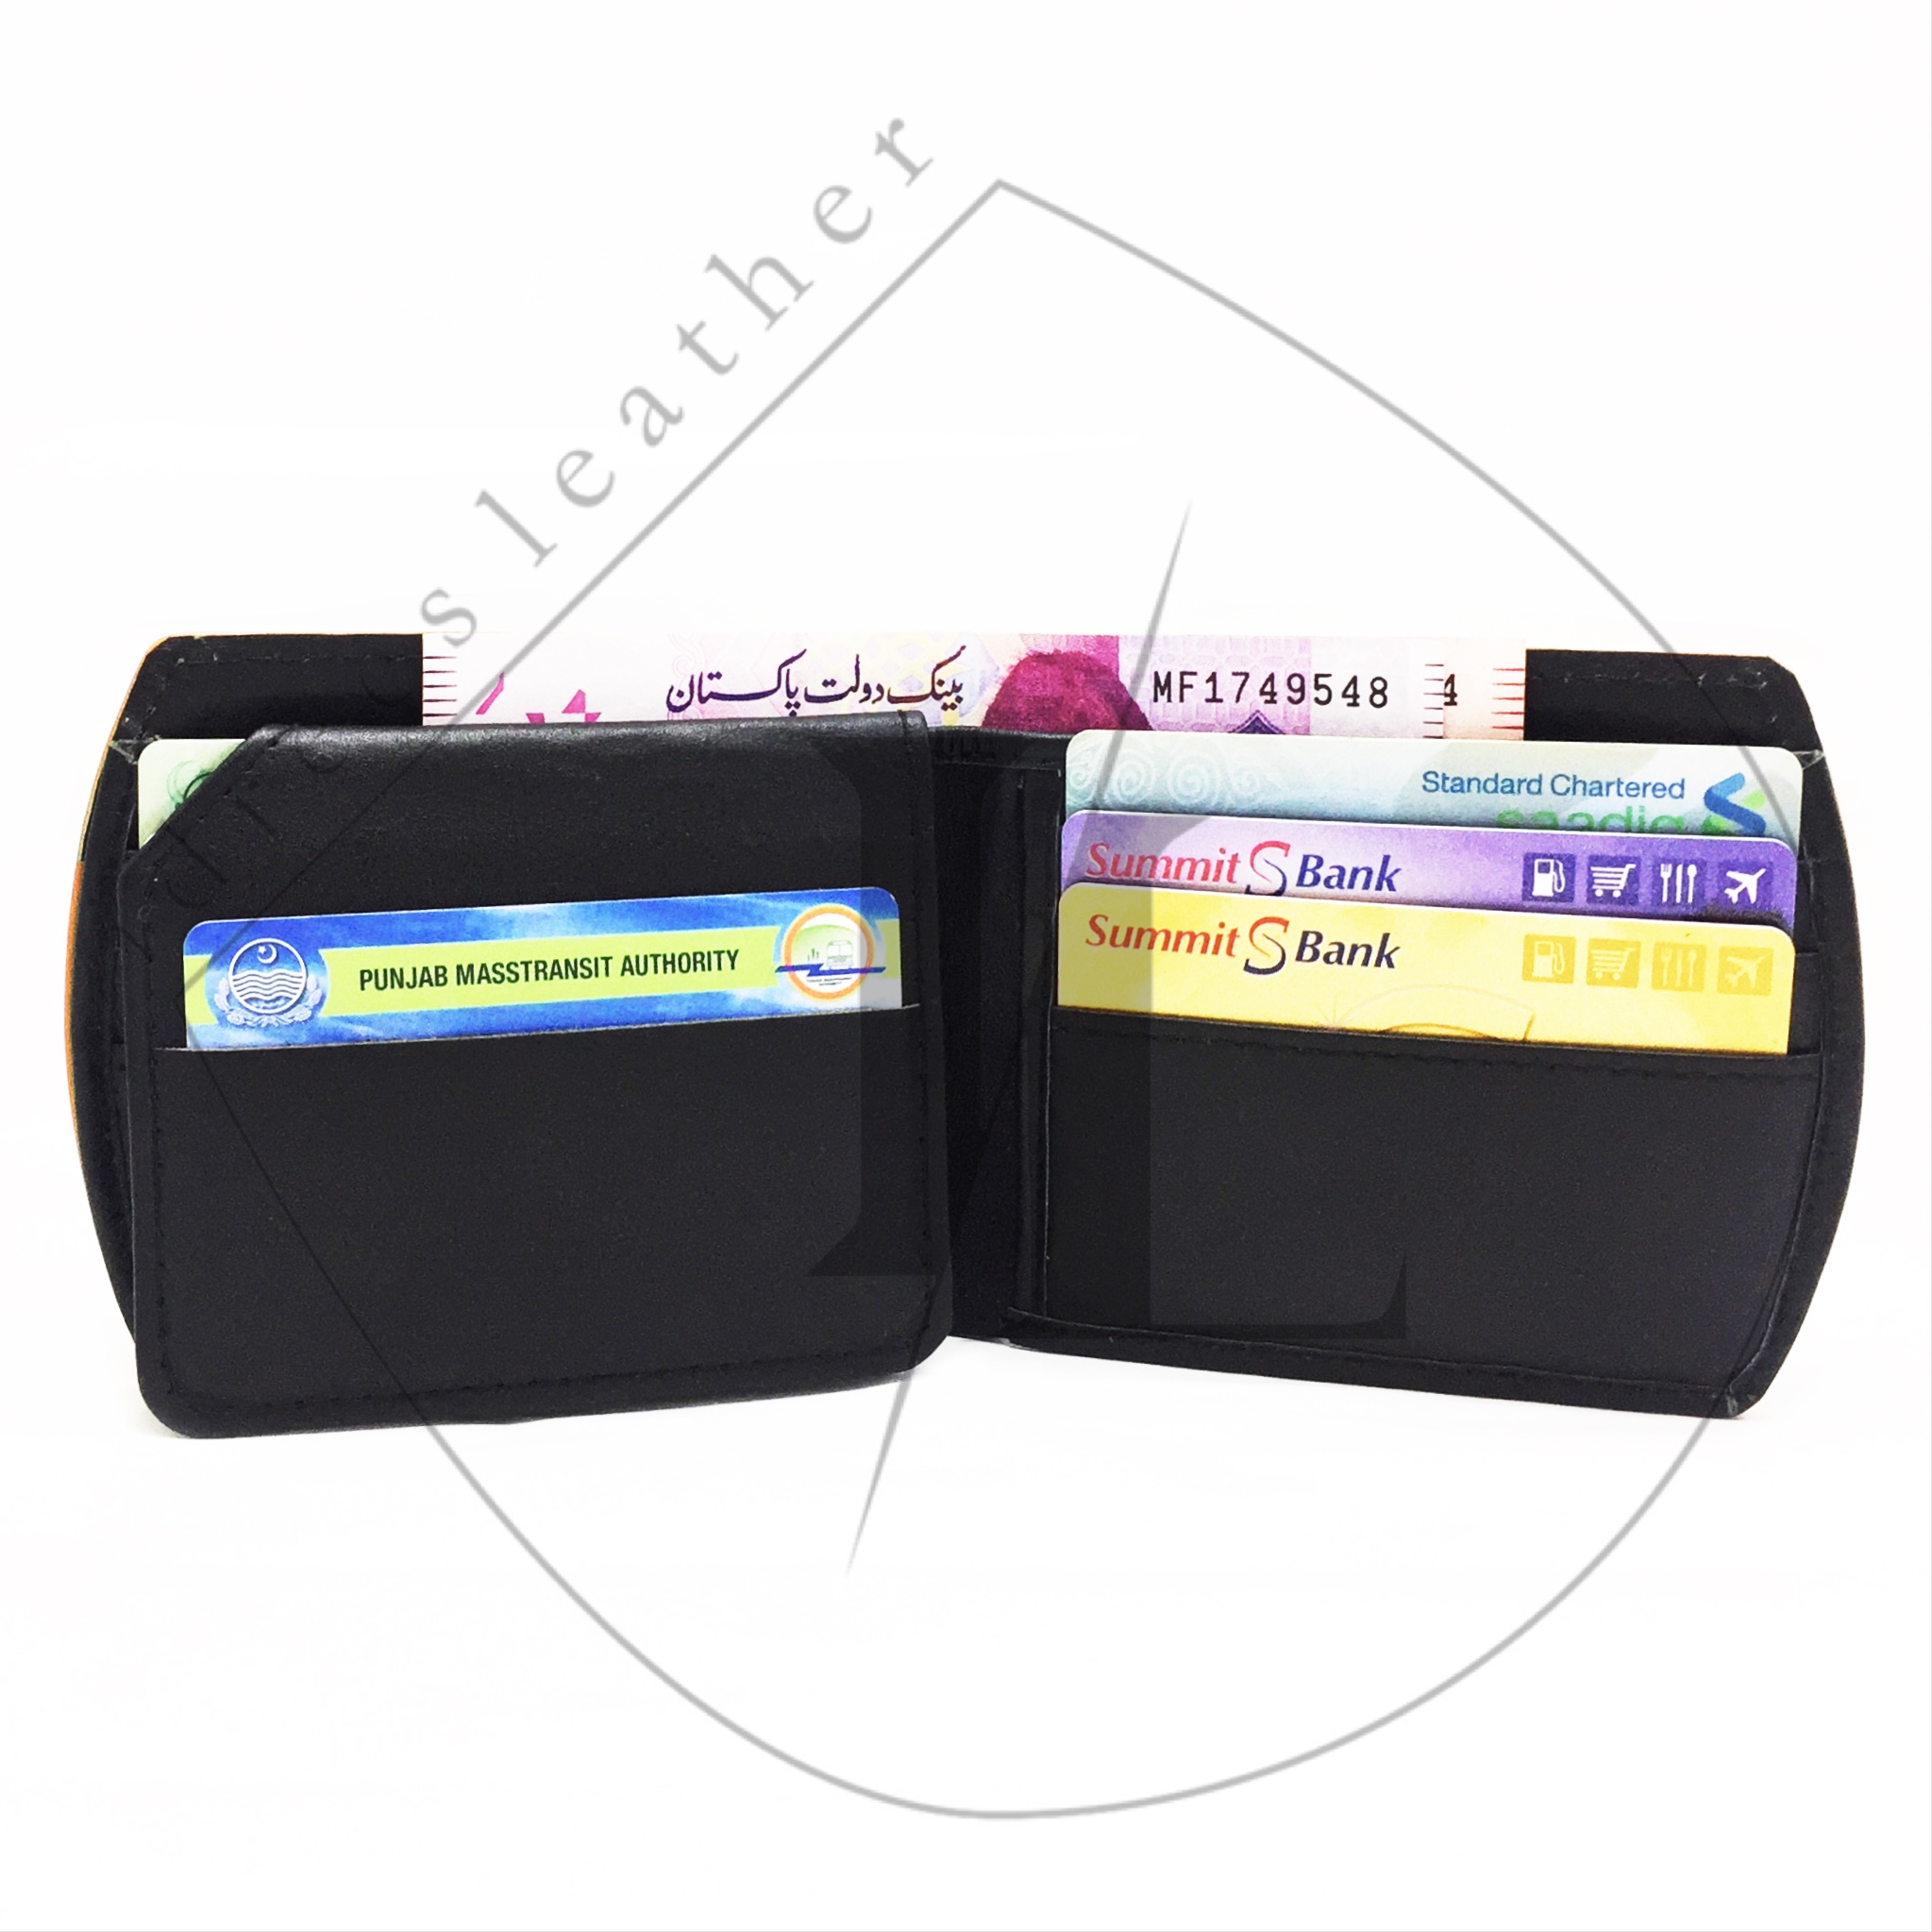 Round_Black_leather_wallet__Idrees_Leather